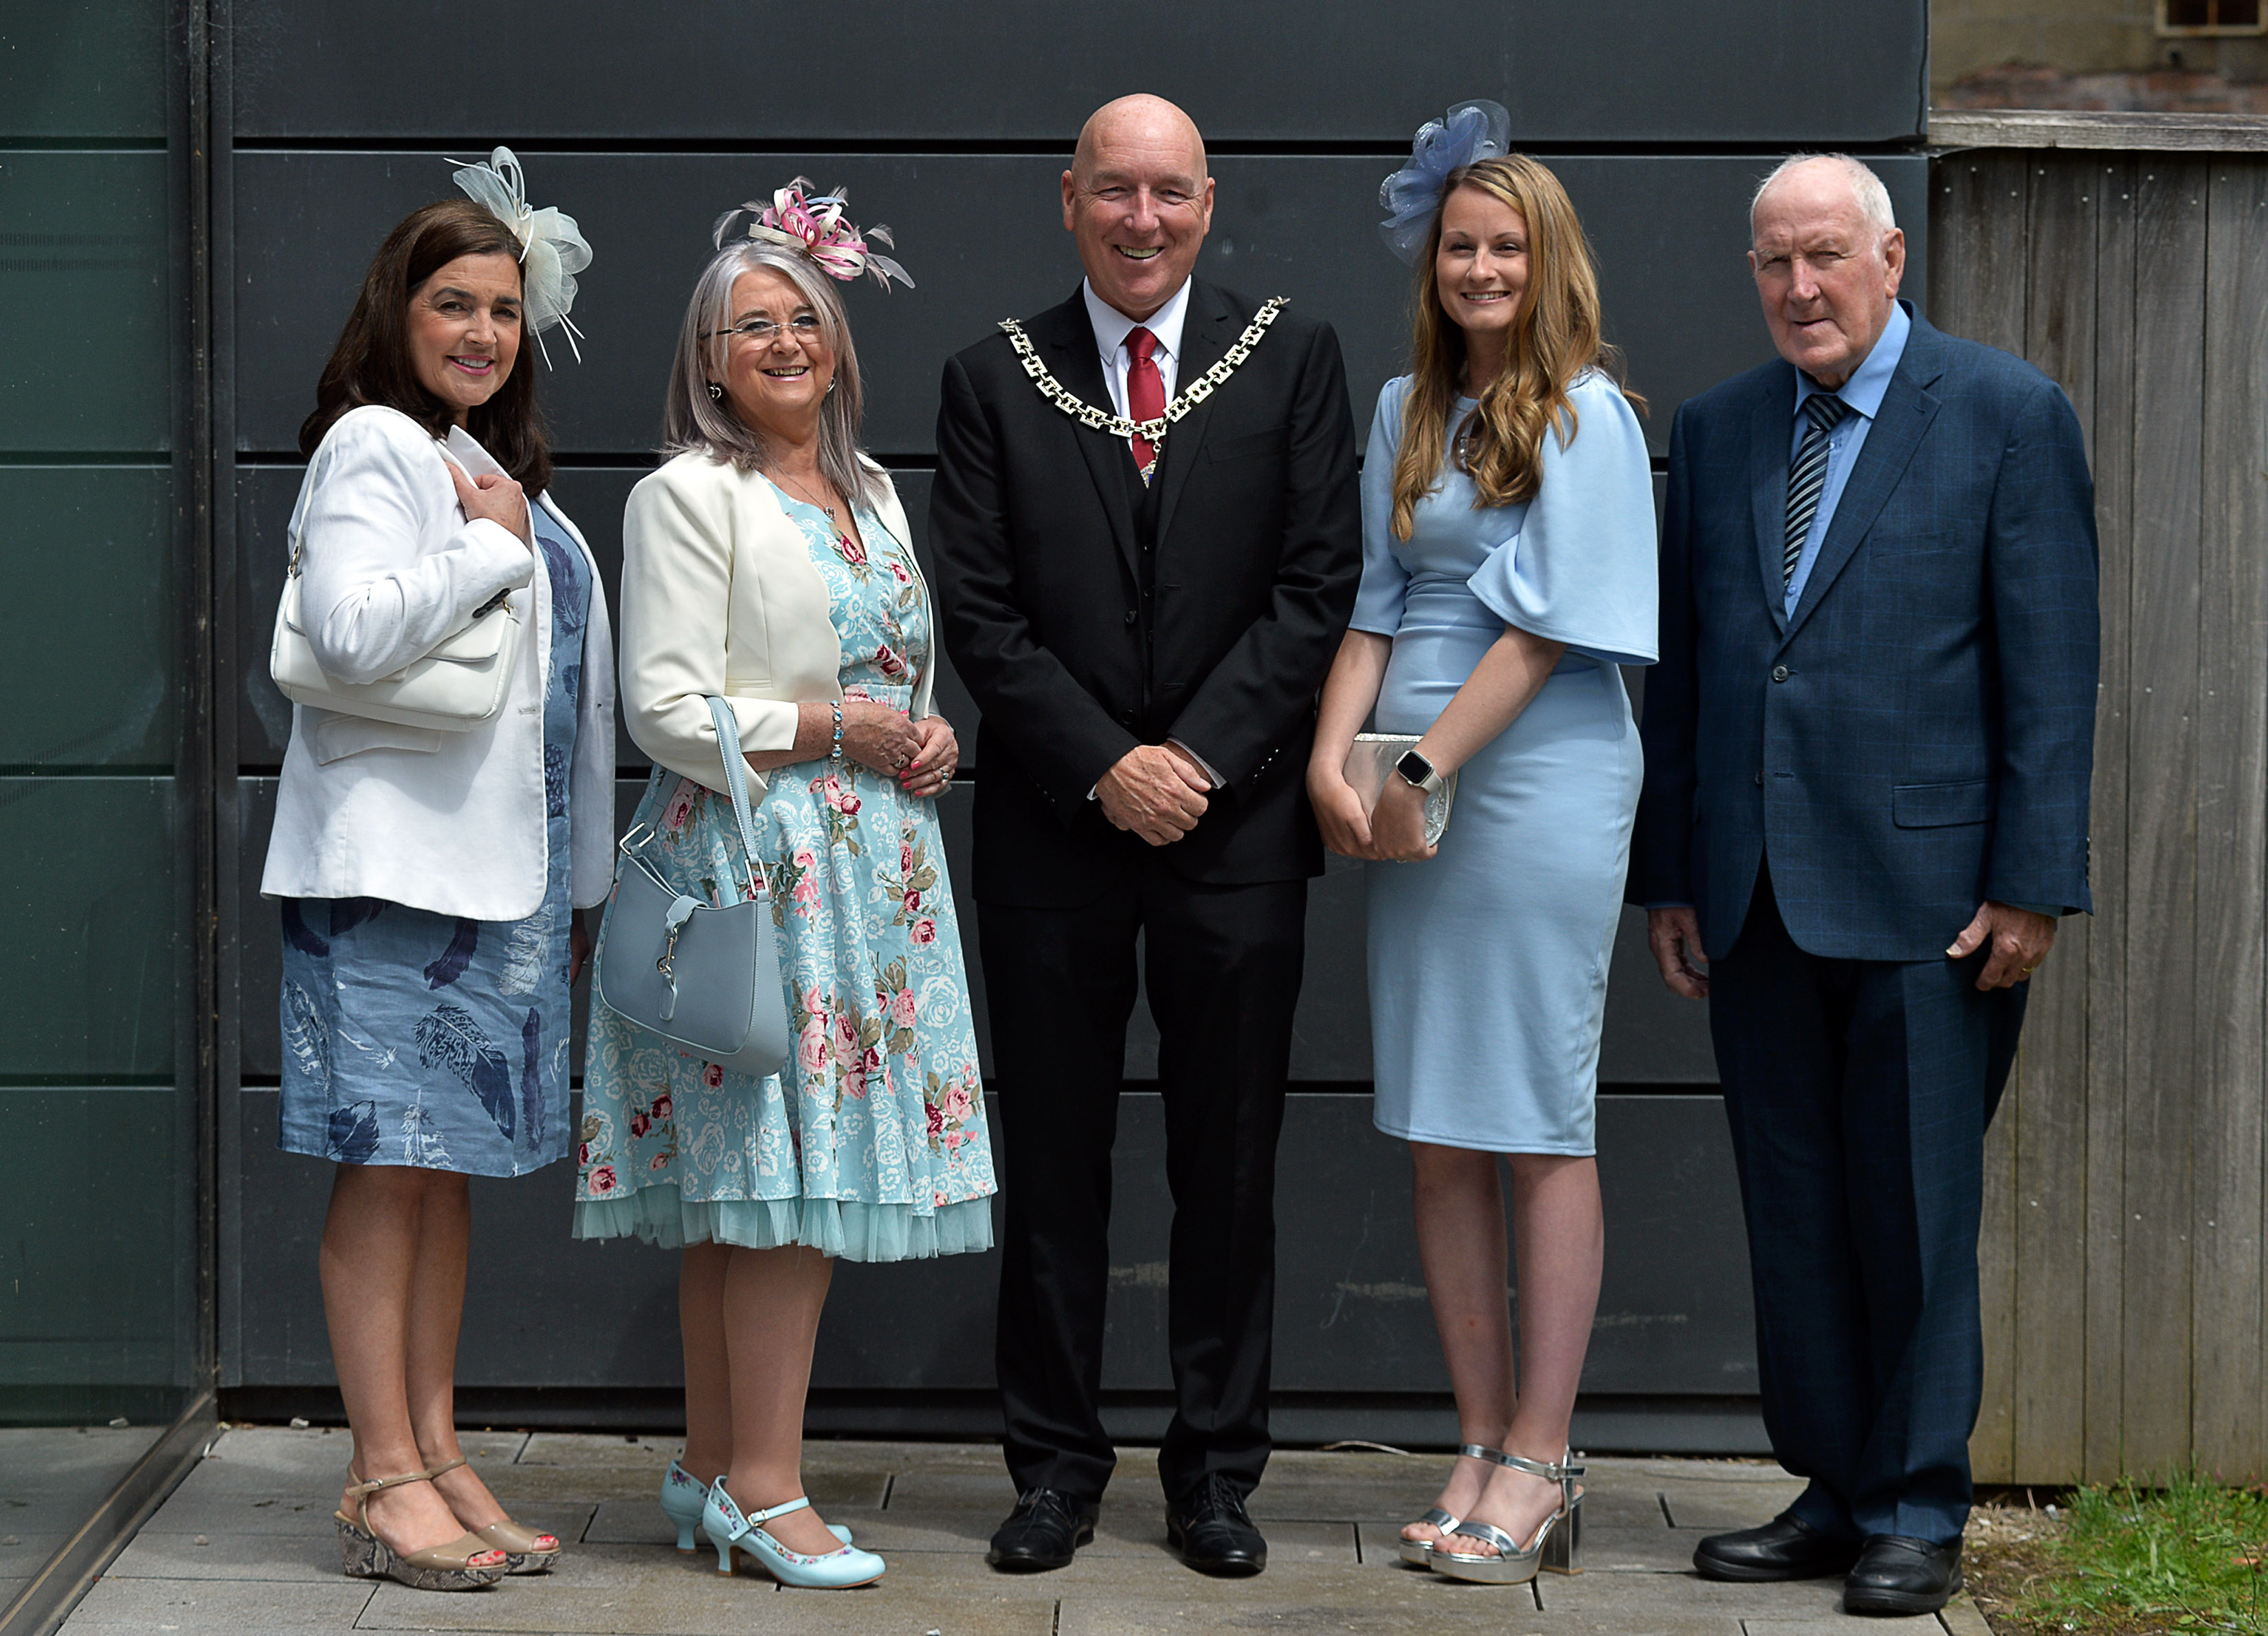 A group of West Dunbartonshire residents had tea with the Prince of Wales last week at the annual Royal Garden Party.